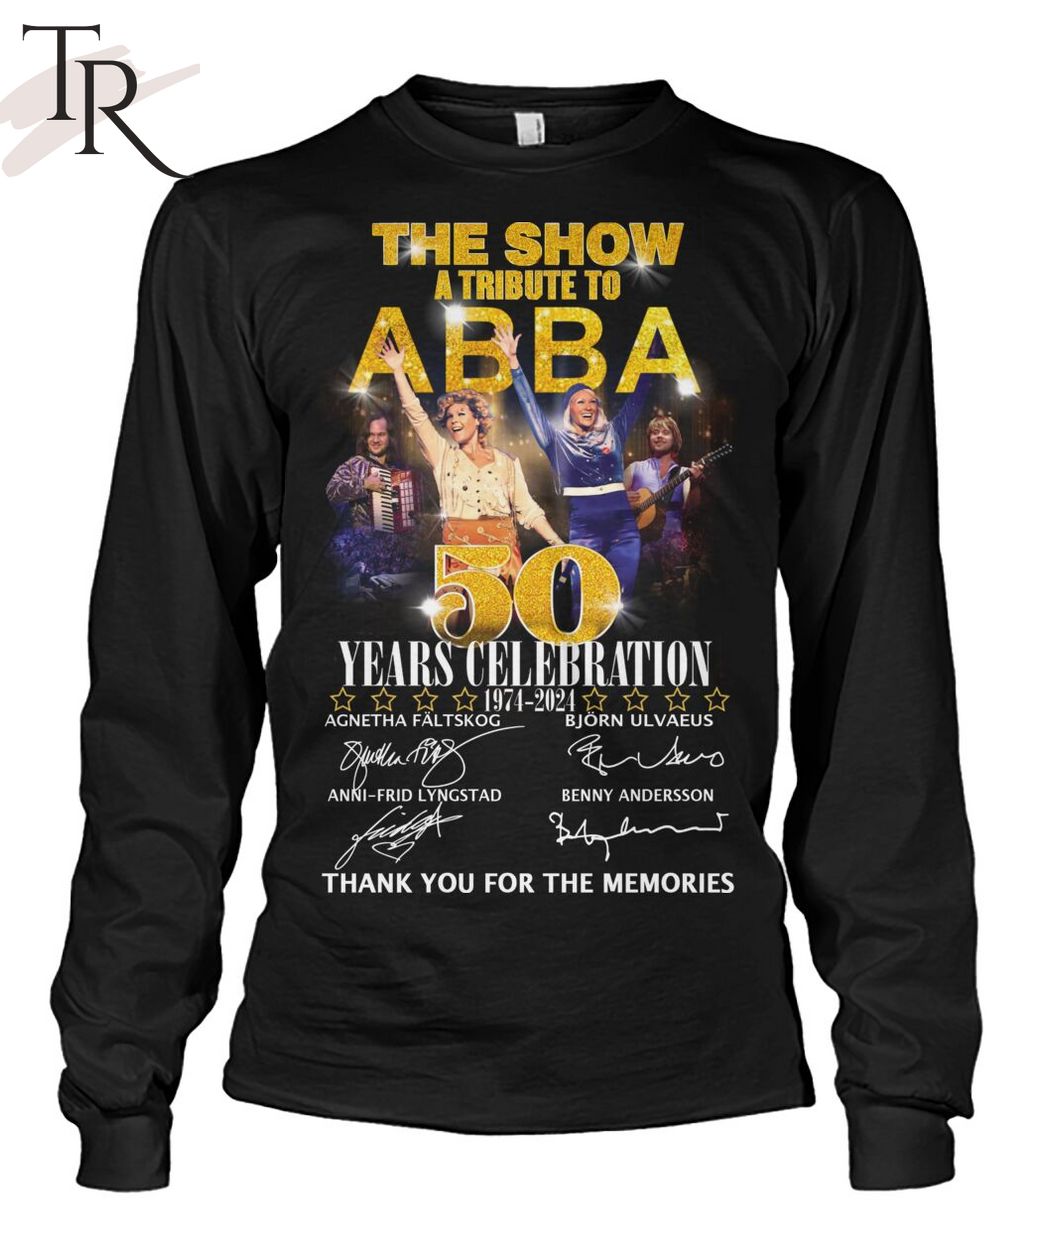 The Show A Tribute To ABBA 50 Years Celebration 1974-2024 Thank You For The Memories T-Shirt